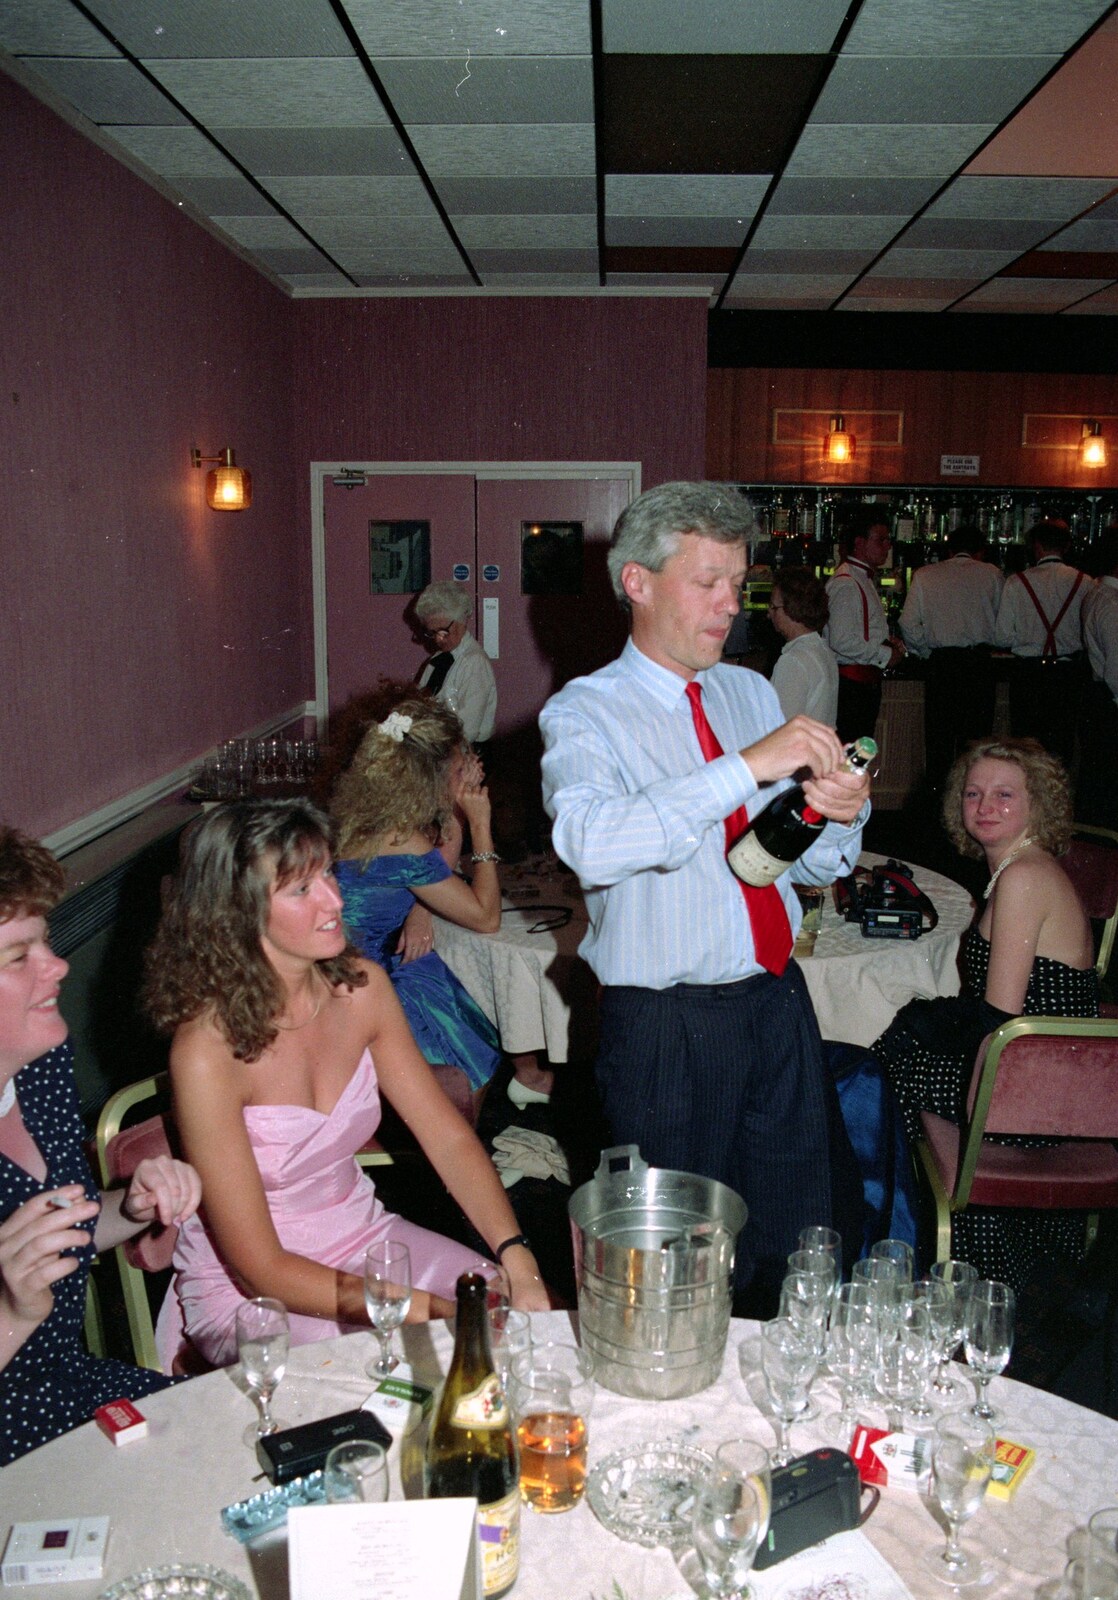 Fizz is popped from Uni: The BABS End-of-Course Ball, New Continental Hotel, Plymouth - 21st June 1989